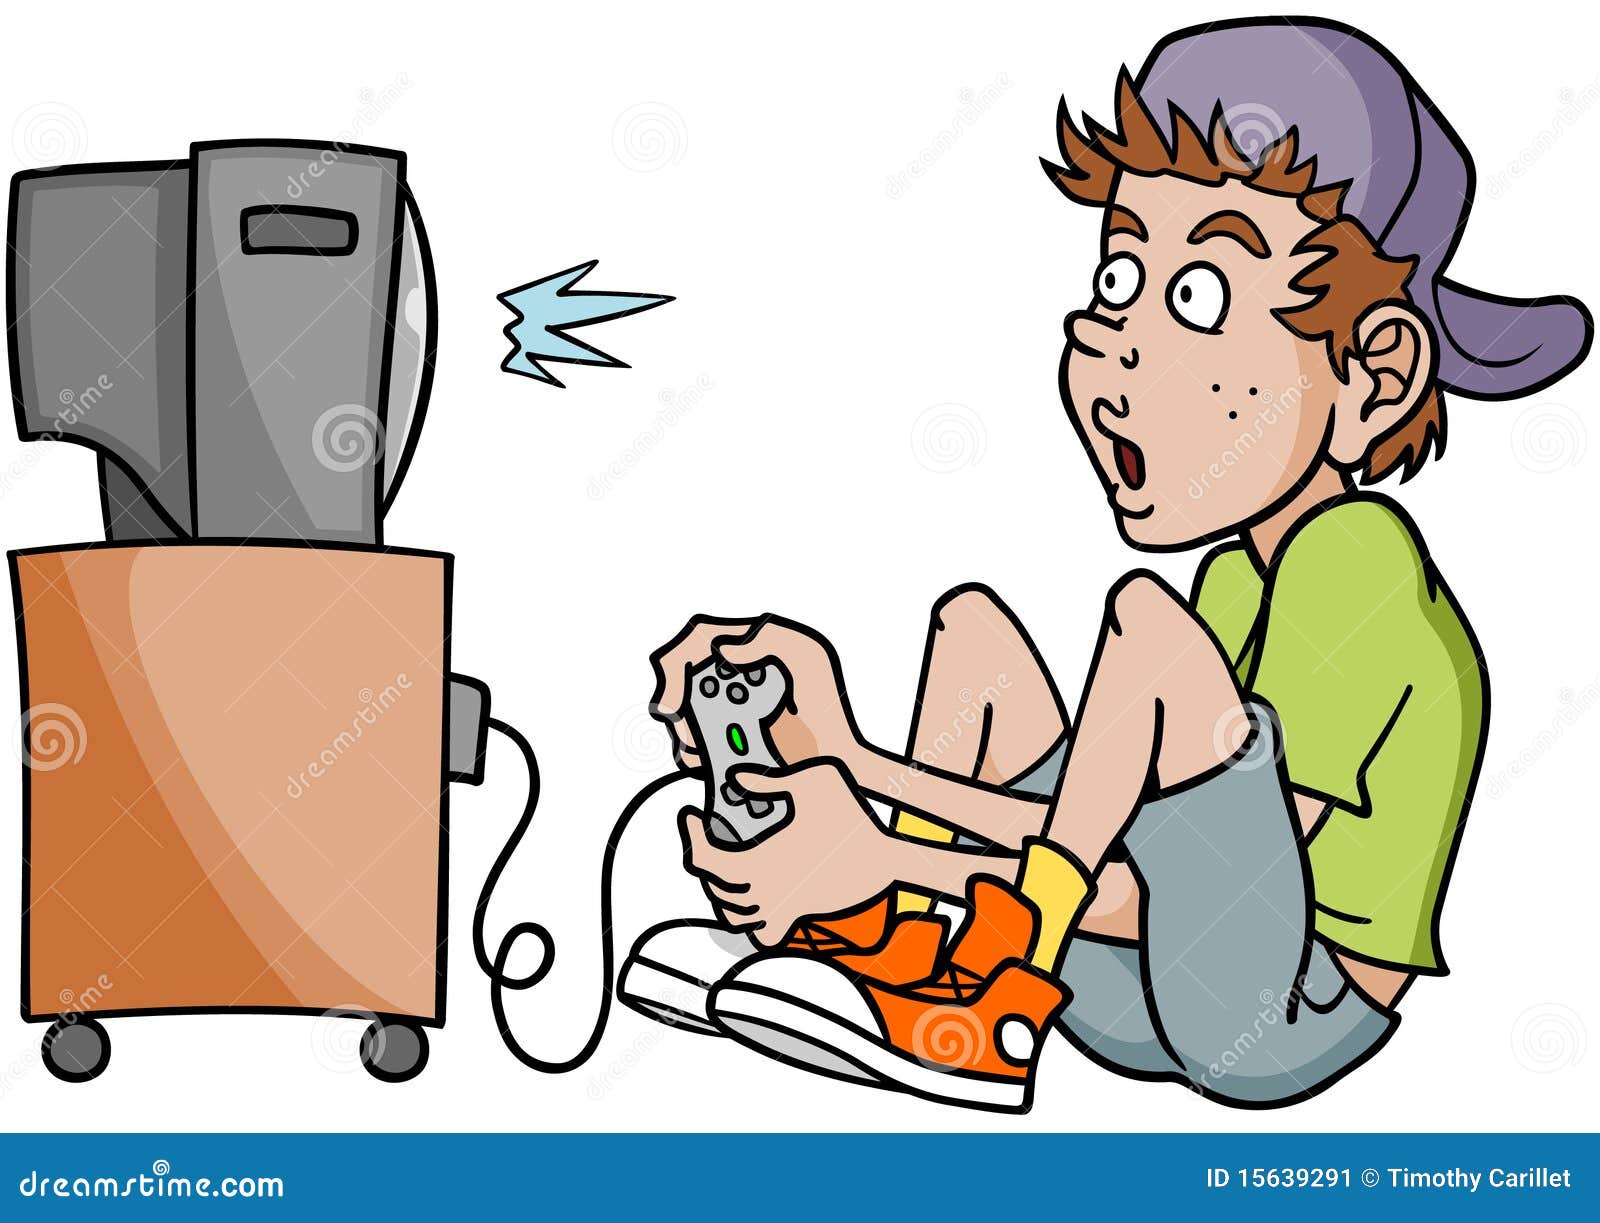 child playing video games clipart - photo #5